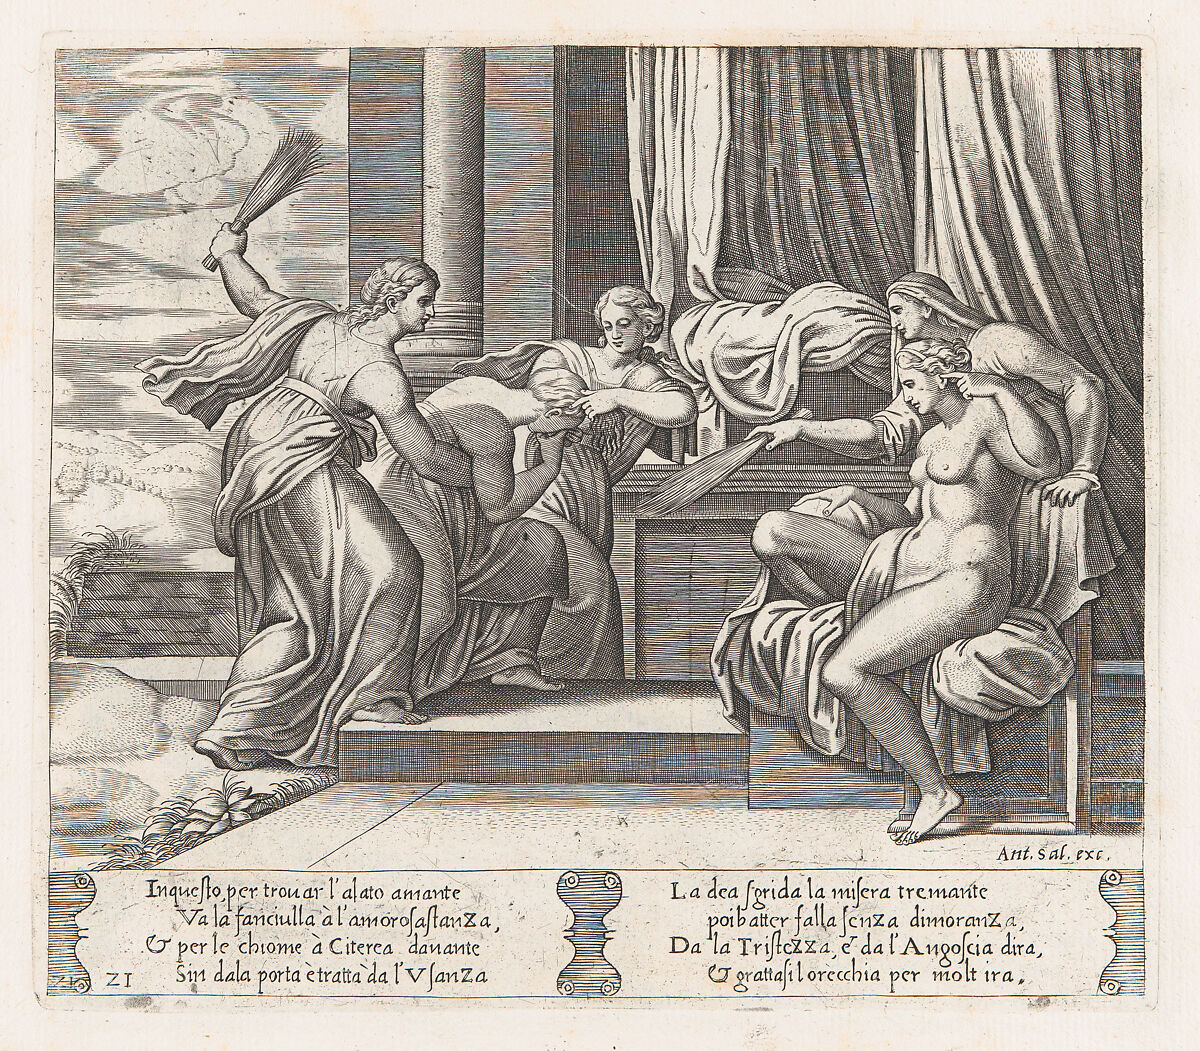 Plate 21: Female personifications of Sorrow and Pain at right punishing Psyche at the behest of Venus, who sits at right, from "The Story of Cupid and Psyche as told by Apuleius", Master of the Die (Italian, active Rome, ca. 1530–60), Engraving 